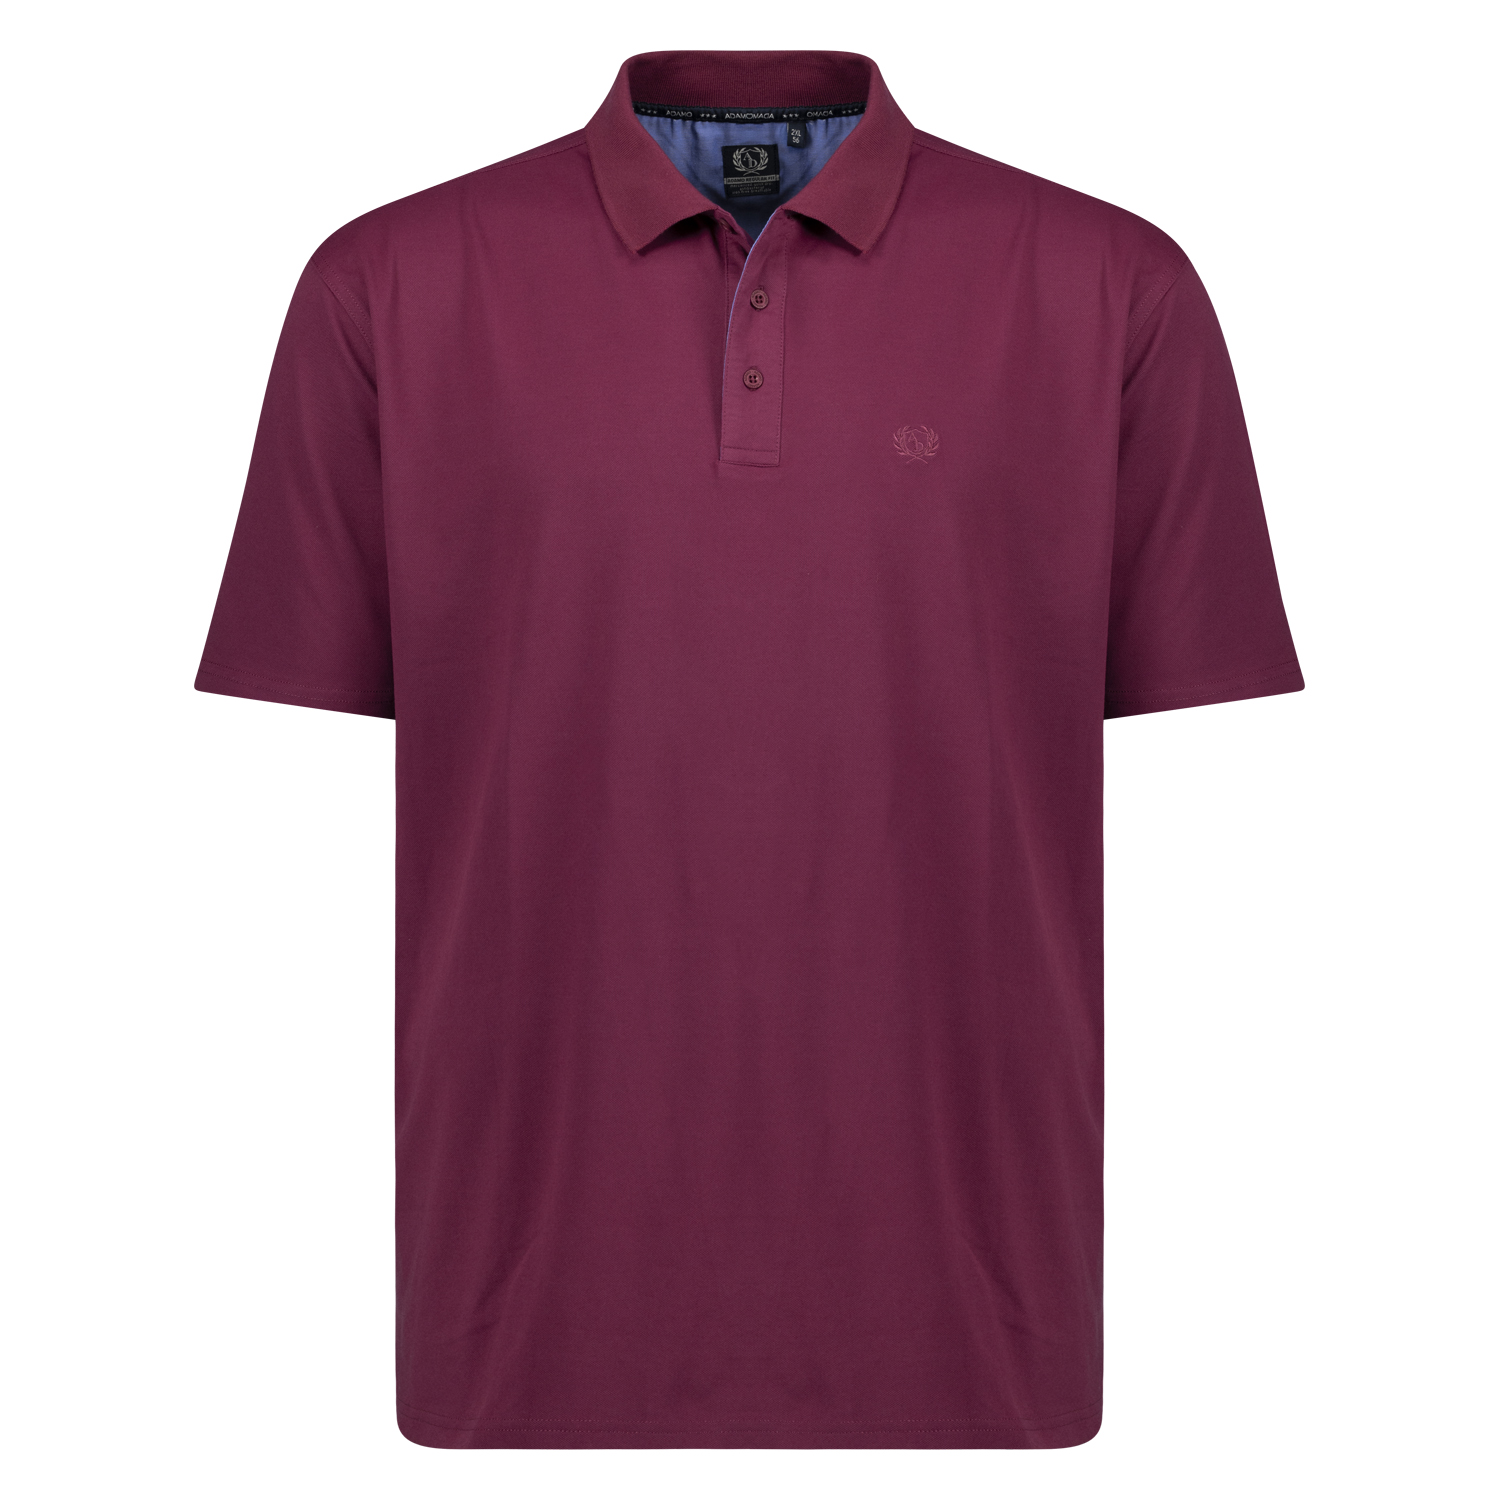 Functional polo shirt in blackberry for men by Adamo series "PEER" Tall Fit extra long in long sizes up to 5XLT